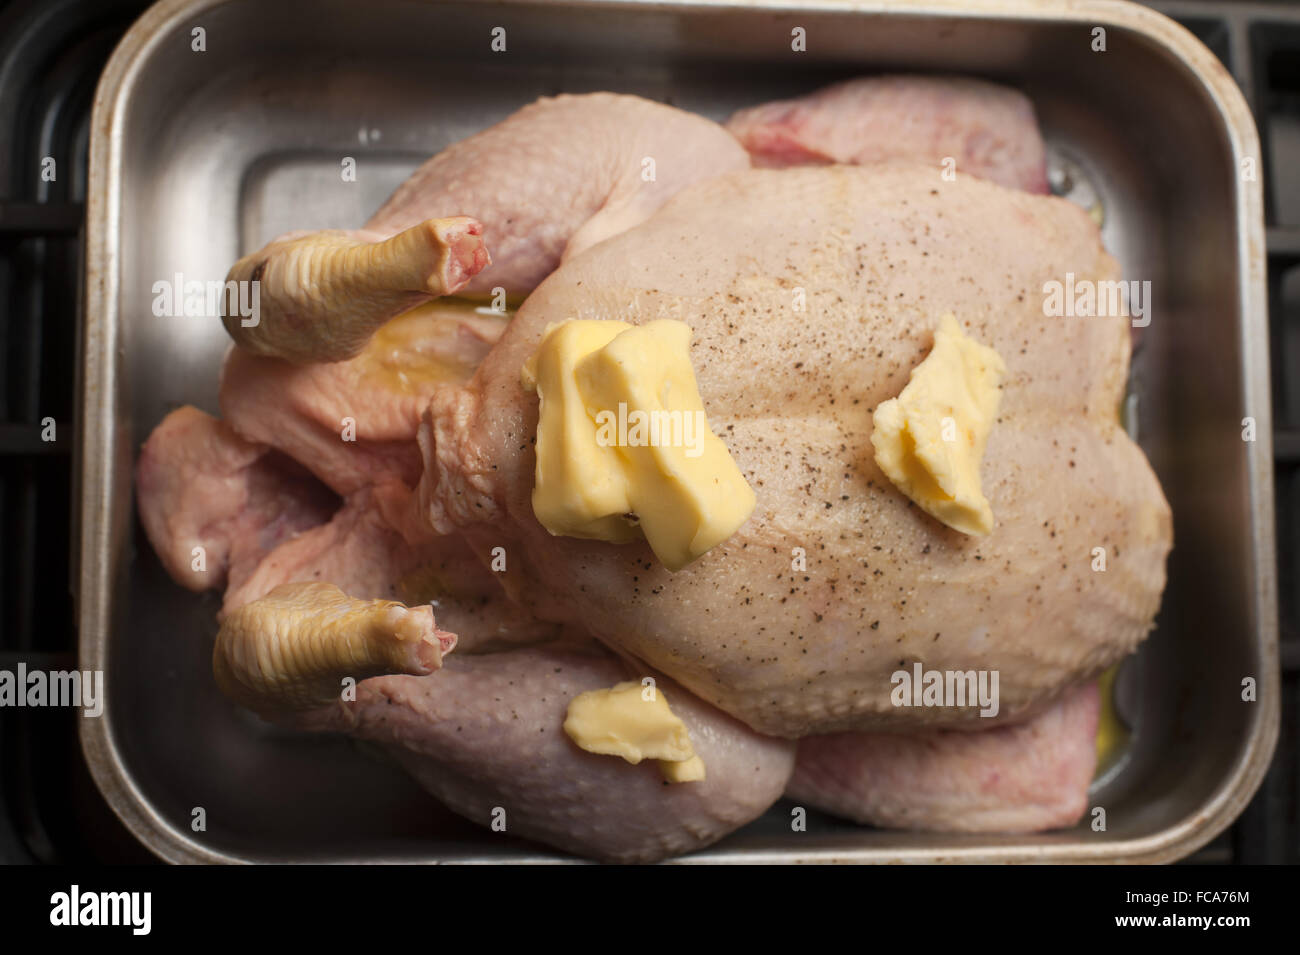 Preparing a raw chicken for roasting Stock Photo